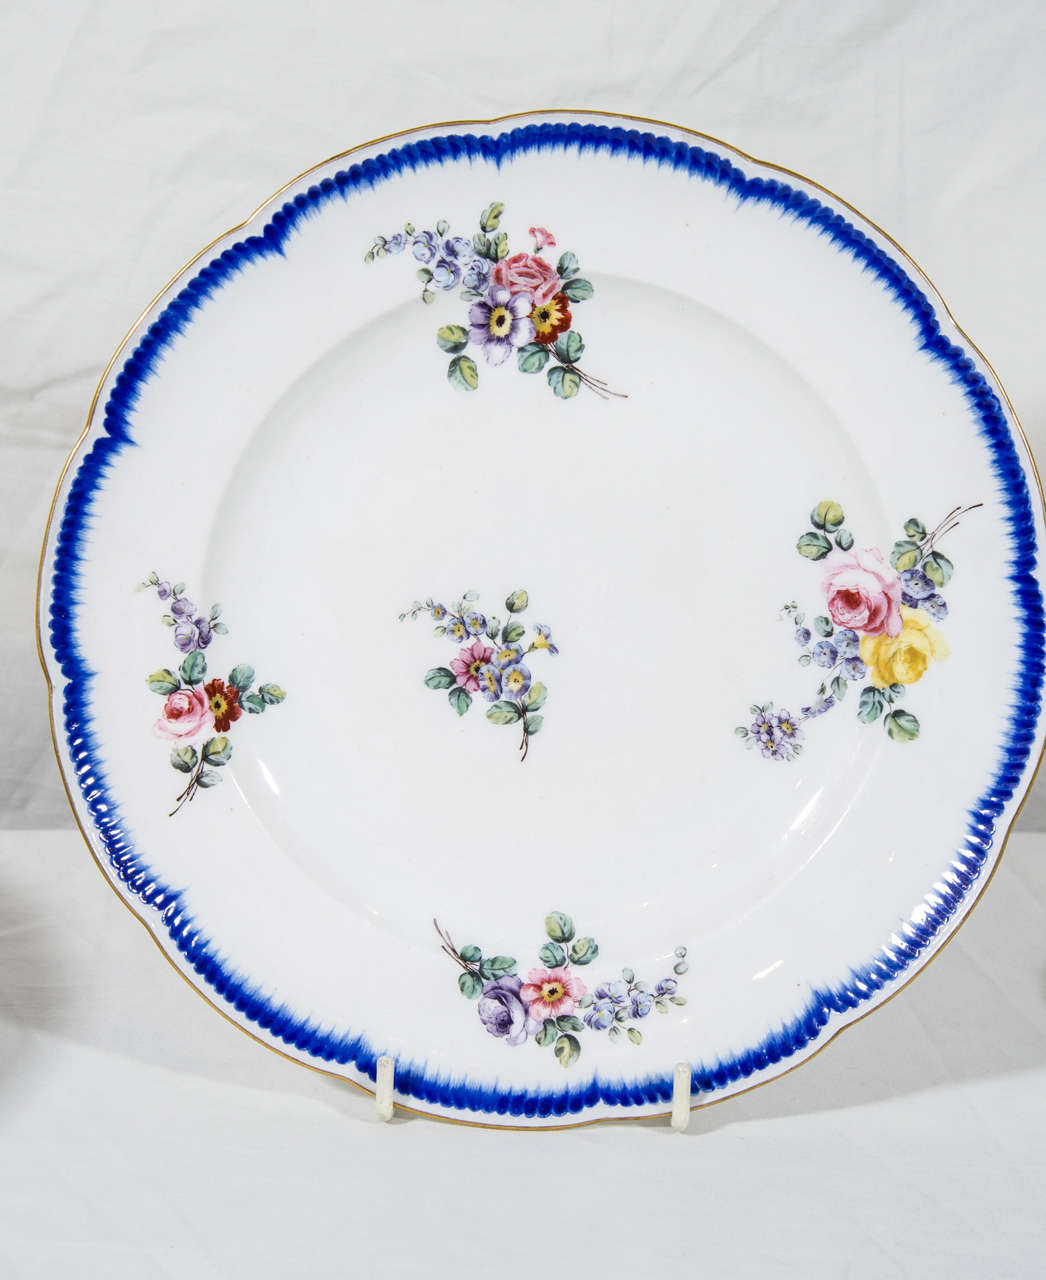 A set of a dozen 18th century exceptionally beautiful Sèvres soft-paste porcelain dinner plates decorated all-over with loose bouquets of flowers within blue enamel Feuille-de-Choux borders, and gilt-line rim on a scalloped edge. The base of each